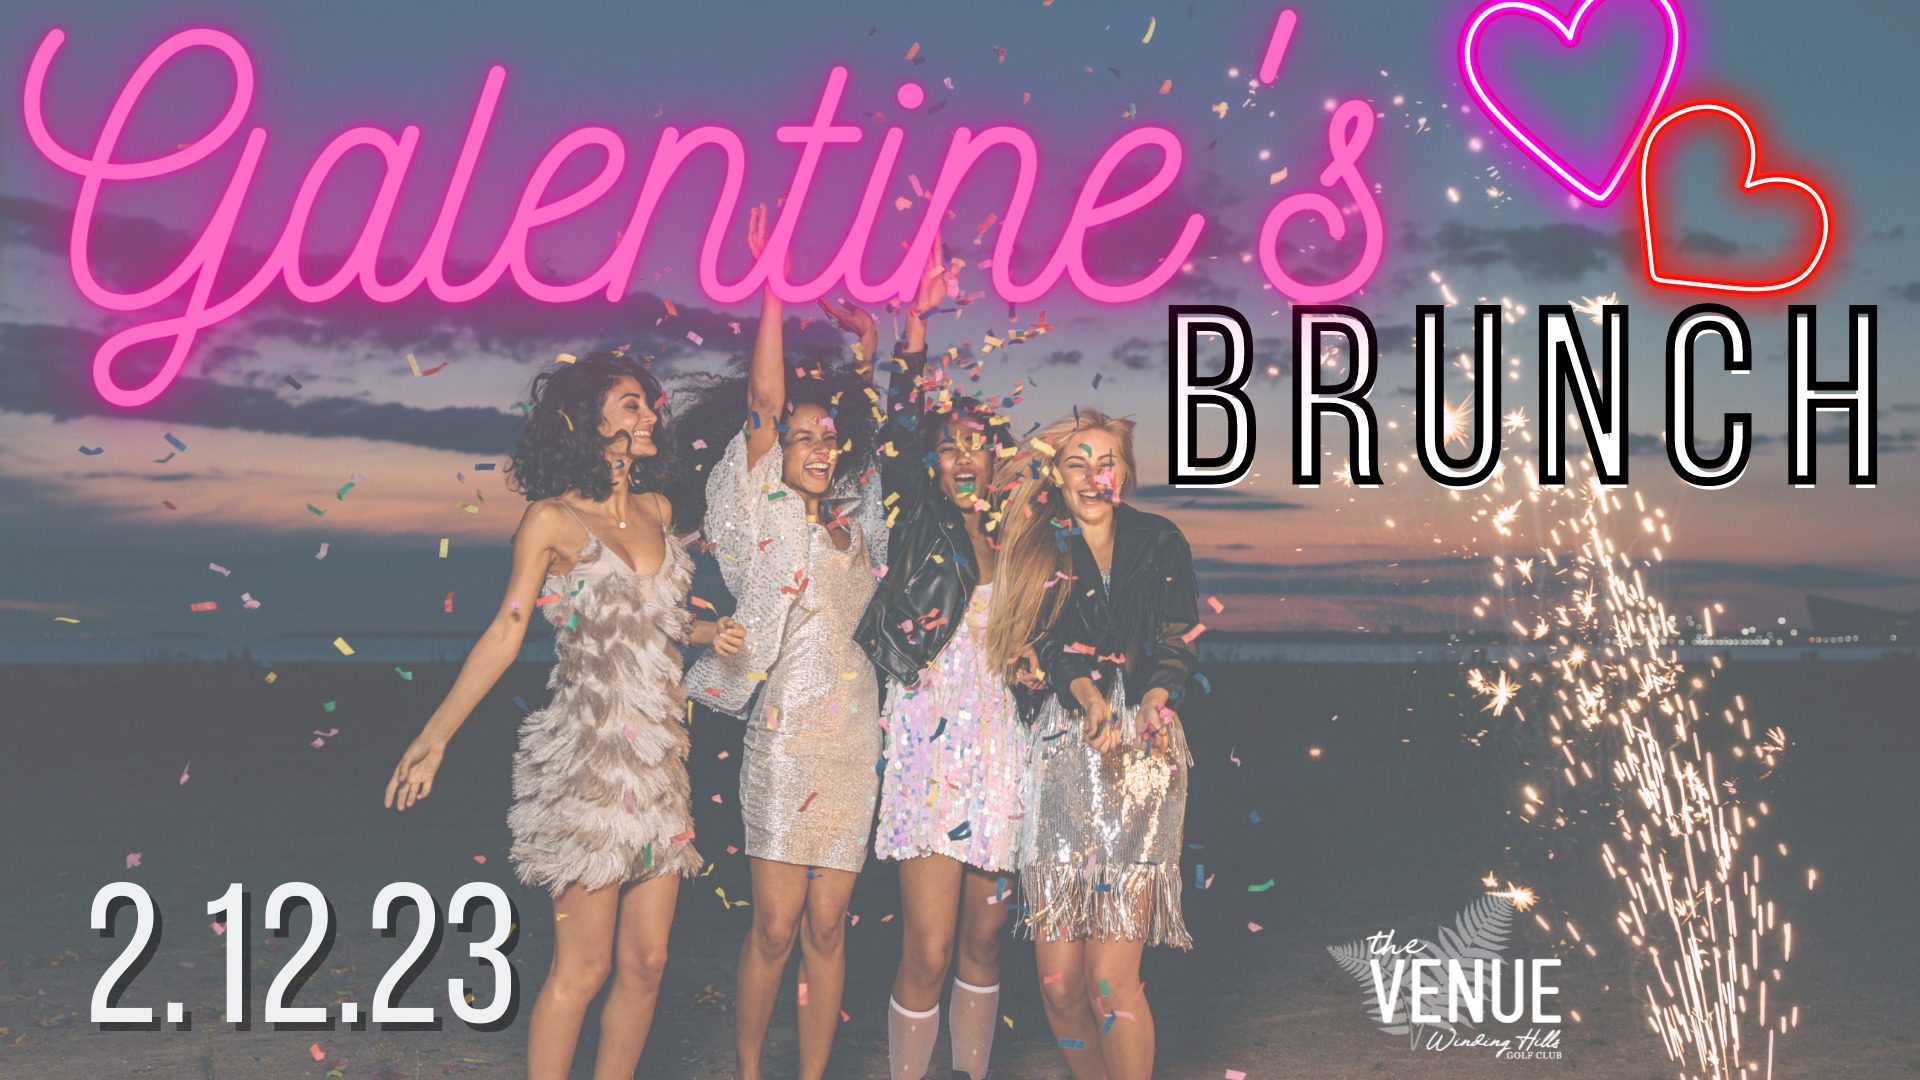 Galentines Brunch @ The Venue at Winding Hills Golf Club